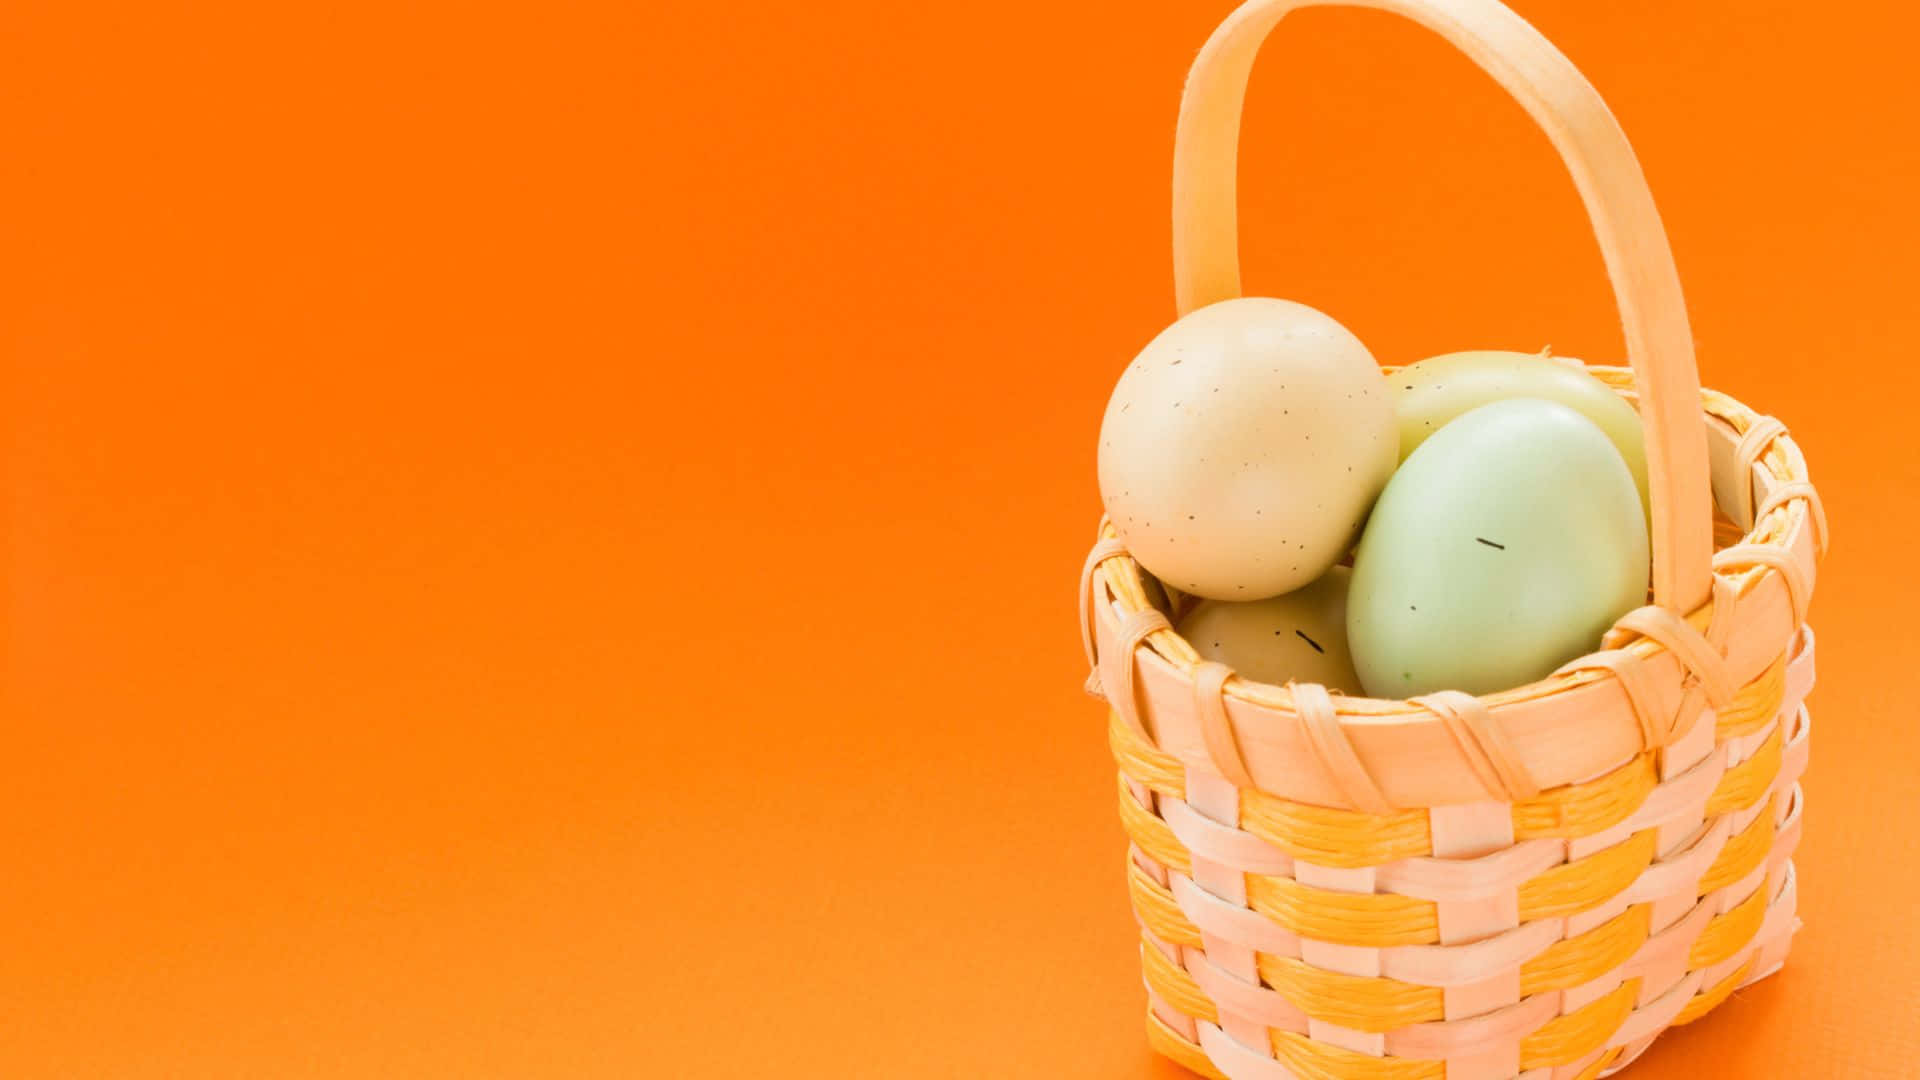 A Basket With Eggs In It On An Orange Background Wallpaper